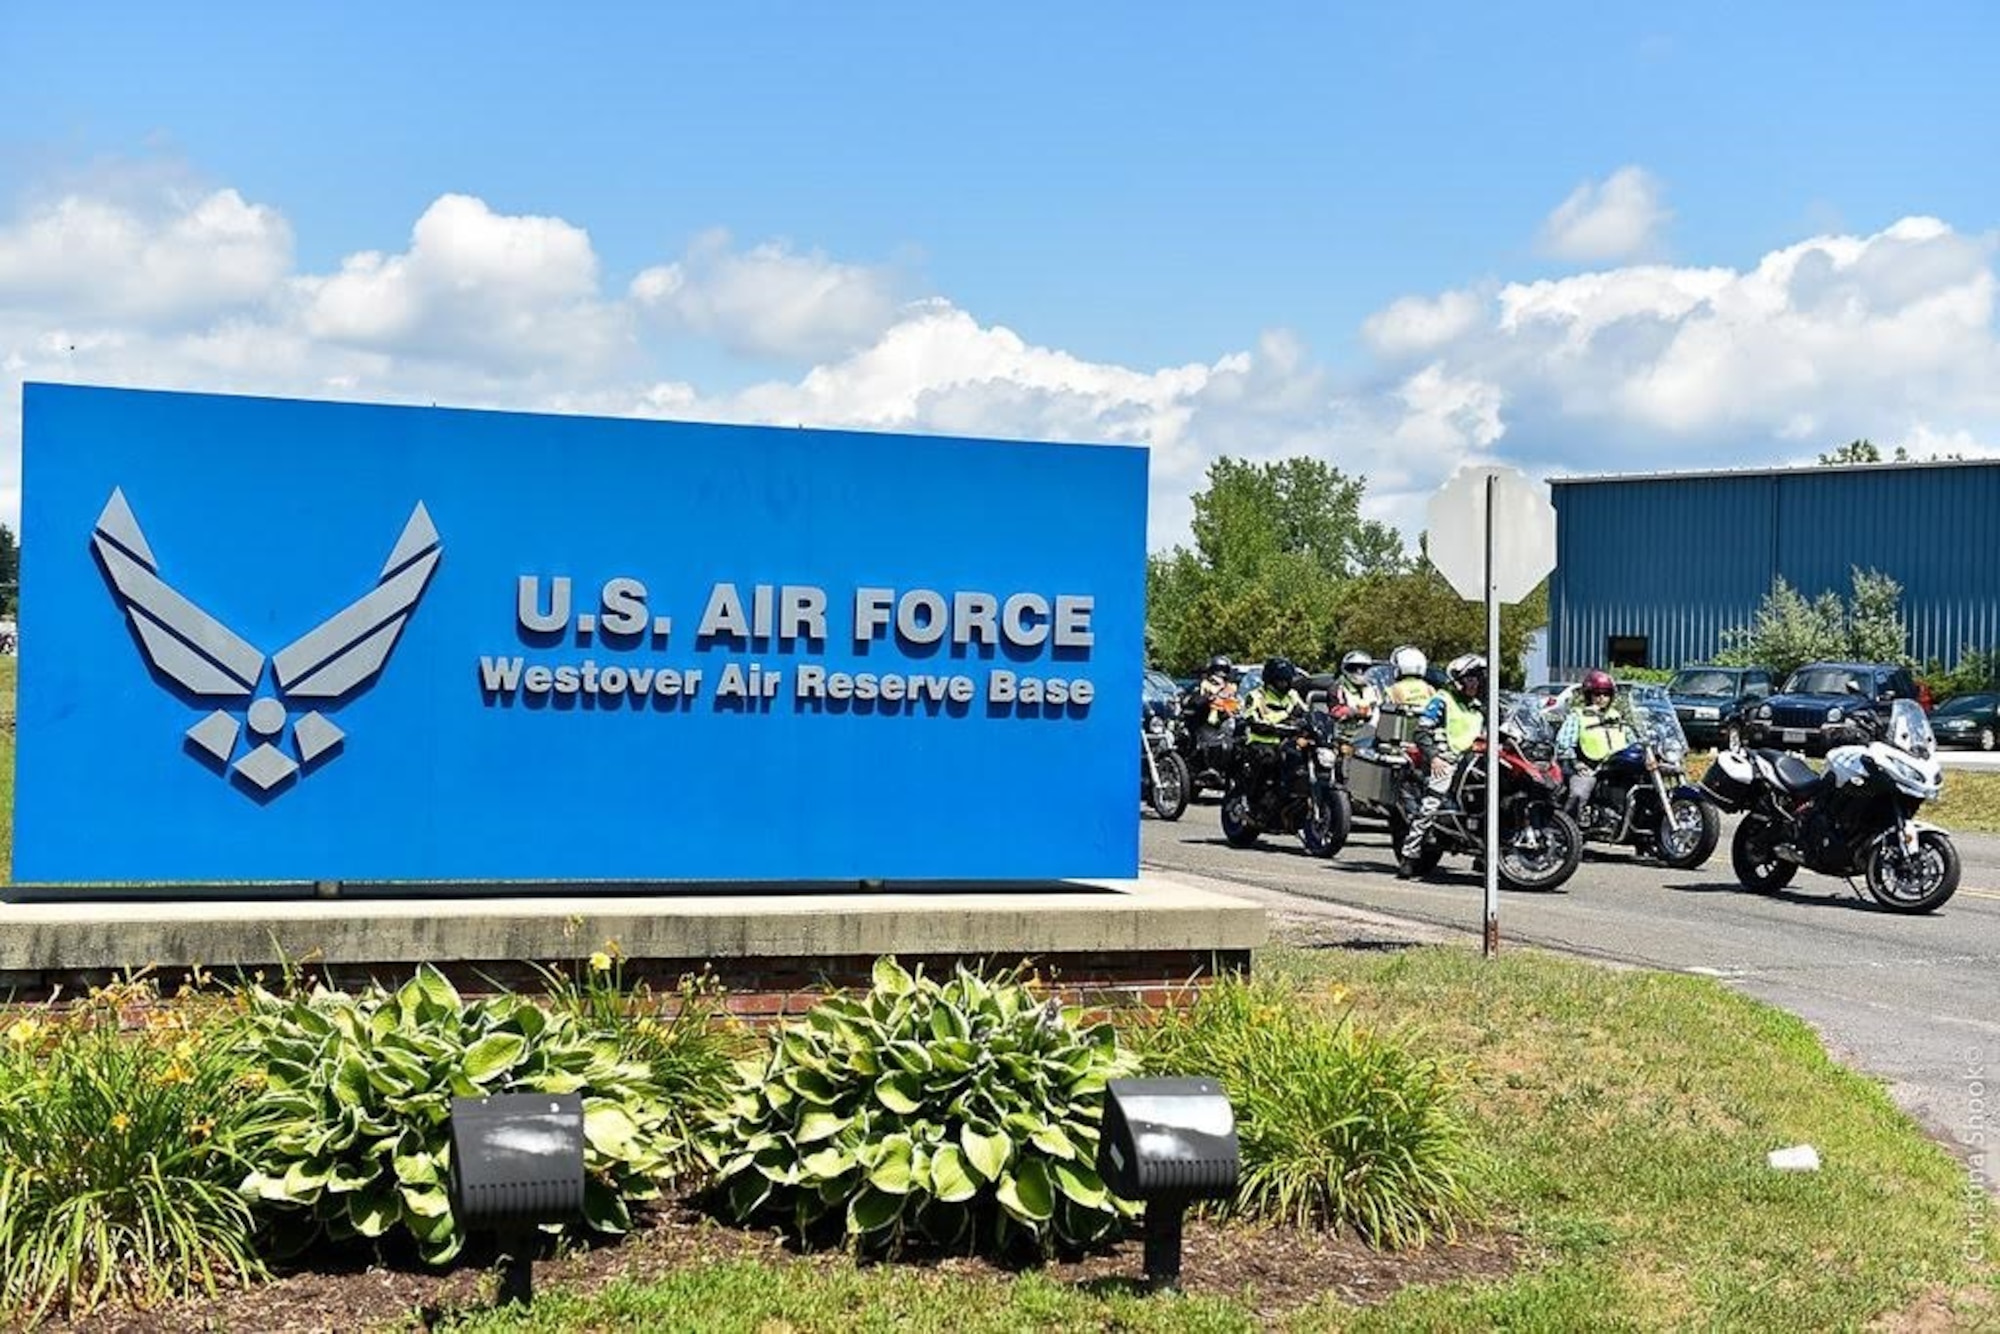 Nearly 75 members of the local community, family, friends, military members and motorcycle enthusiasts came together to kick off a cross-country motorcycle journey in celebration of the 100th anniversary of the Van Buren sisters ride from New York to California in 1916. (U.S. Air Force courtesy photo)